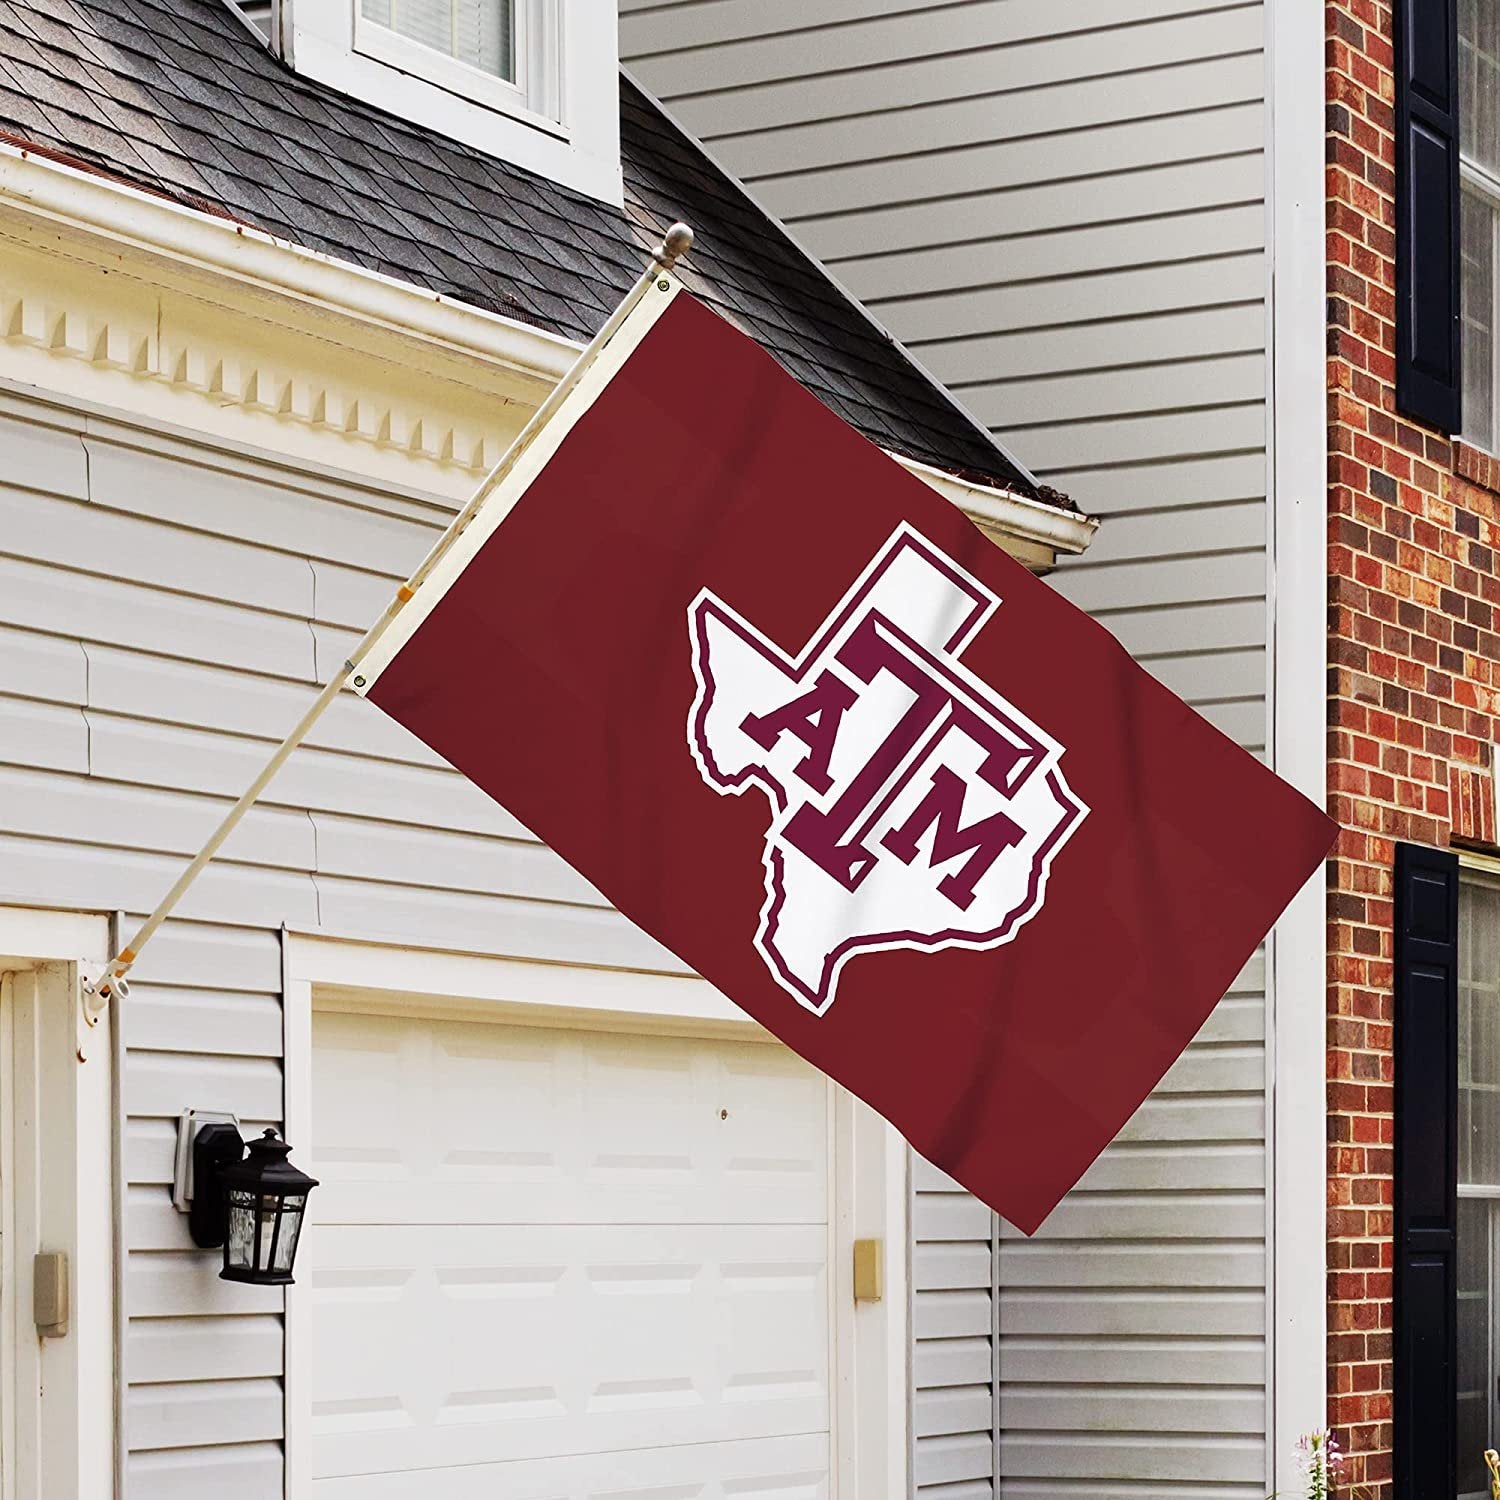 Texas A&M Aggies 3 x 5 Foot Flag with Grommets University of